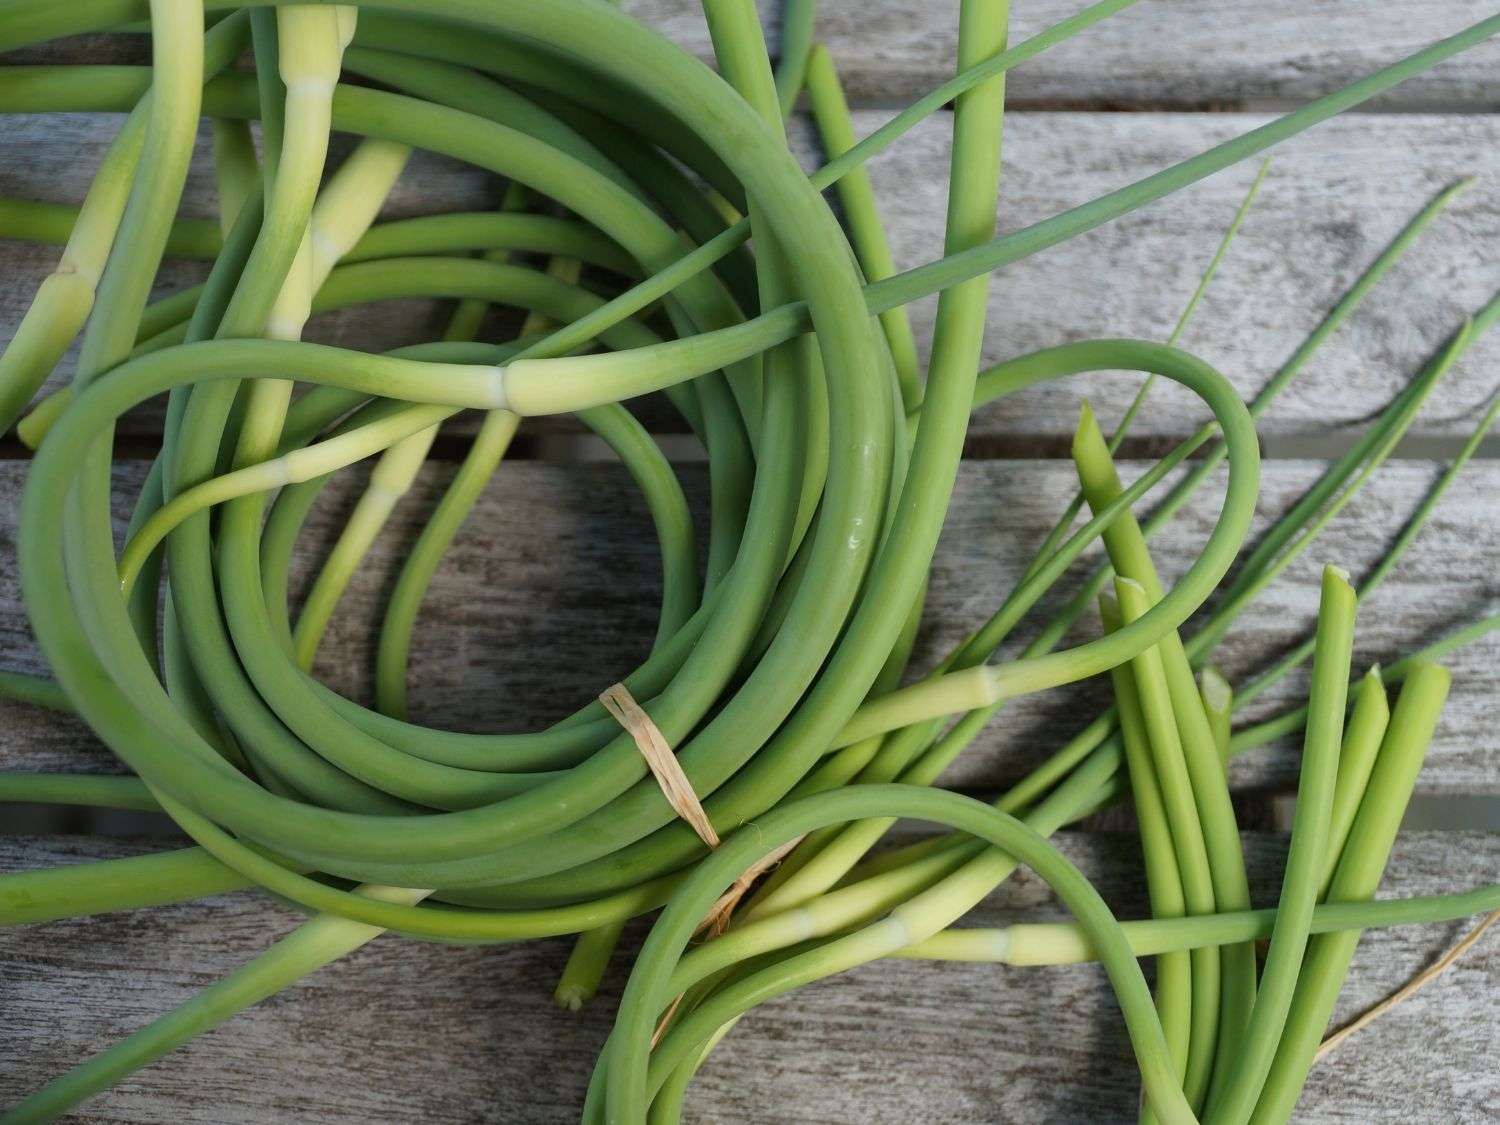 A close up view of harvested garlic scapes on a wooden background